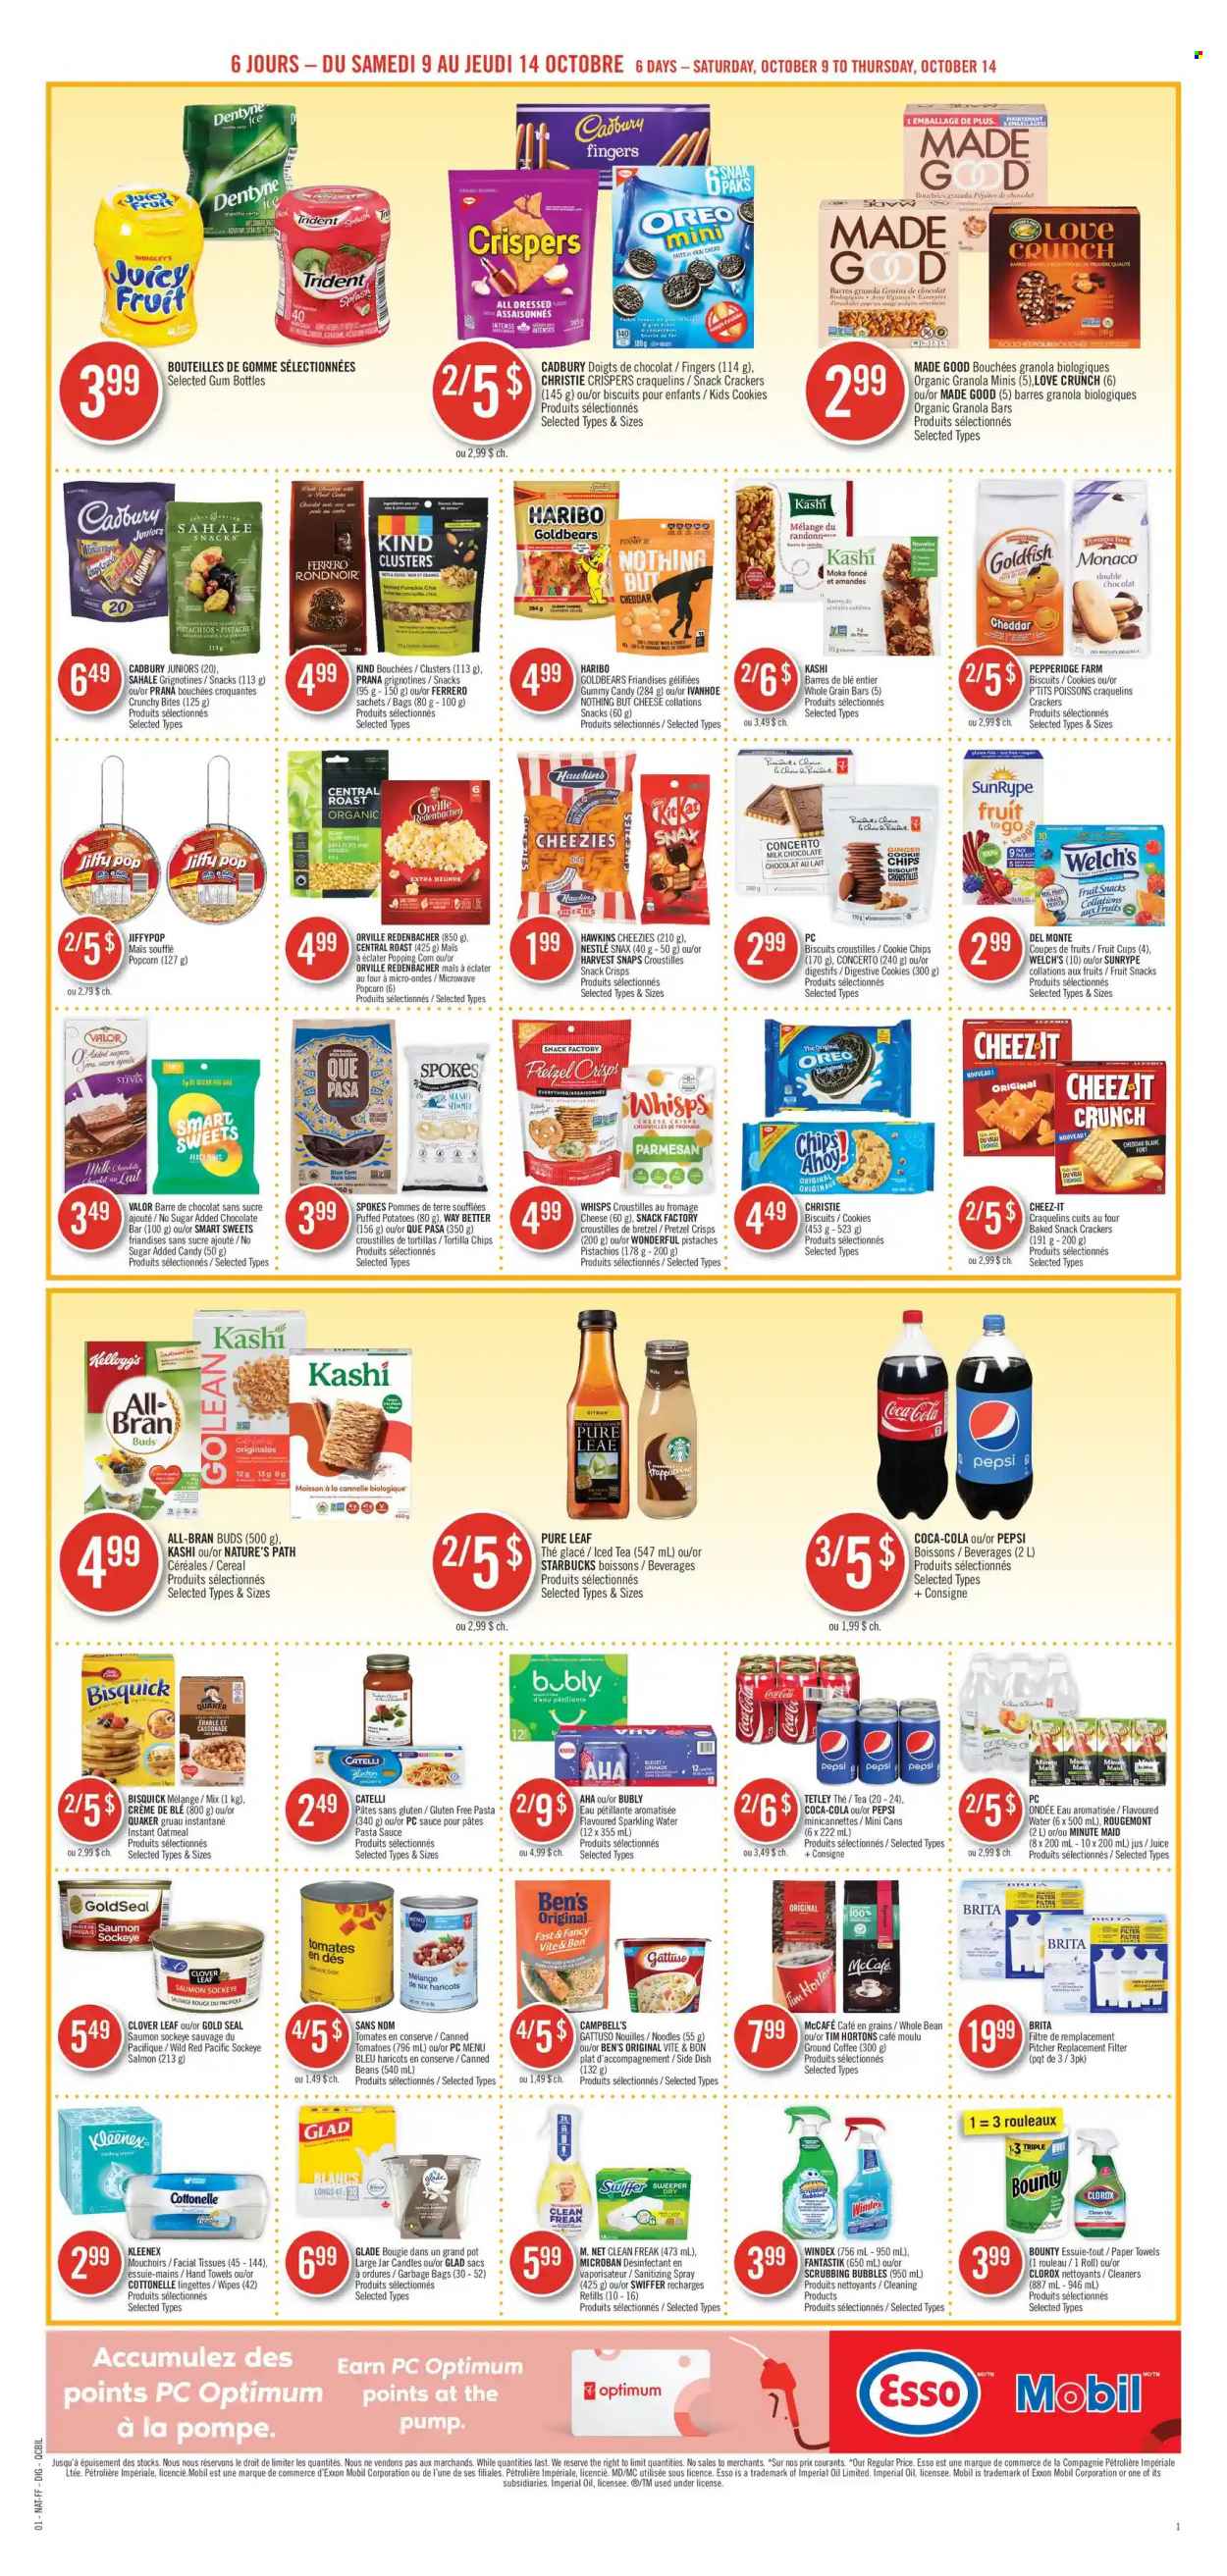 thumbnail - Pharmaprix Flyer - October 09, 2021 - October 14, 2021 - Sales products - corn, ginger, tomatoes, potatoes, fruit cup, Welch's, salmon, Campbell's, pasta sauce, sauce, Quaker, noodles, parmesan, cheese, Clover, cookies, milk chocolate, Haribo, Bounty, crackers, Kellogg's, biscuit, Cadbury, Digestive, Trident, fruit snack, chocolate bar, tortilla chips, popcorn, Goldfish, pretzel crisps, Bisquick, oatmeal, Harvest Snaps, cereals, granola bar, All-Bran, pistachios, Coca-Cola, Pepsi, juice, ice tea, fruit punch, Pure Leaf, coffee, ground coffee, Starbucks, McCafe, wipes, Cottonelle, Kleenex, tissues, kitchen towels, paper towels, Windex, Scrubbing Bubbles, Clorox, Swiffer, facial tissues, pitcher, pot, candle, Glade, hand towel, pump, Jiffy, Oreo, Nestlé, chips, Ferrero Rocher. Page 8.